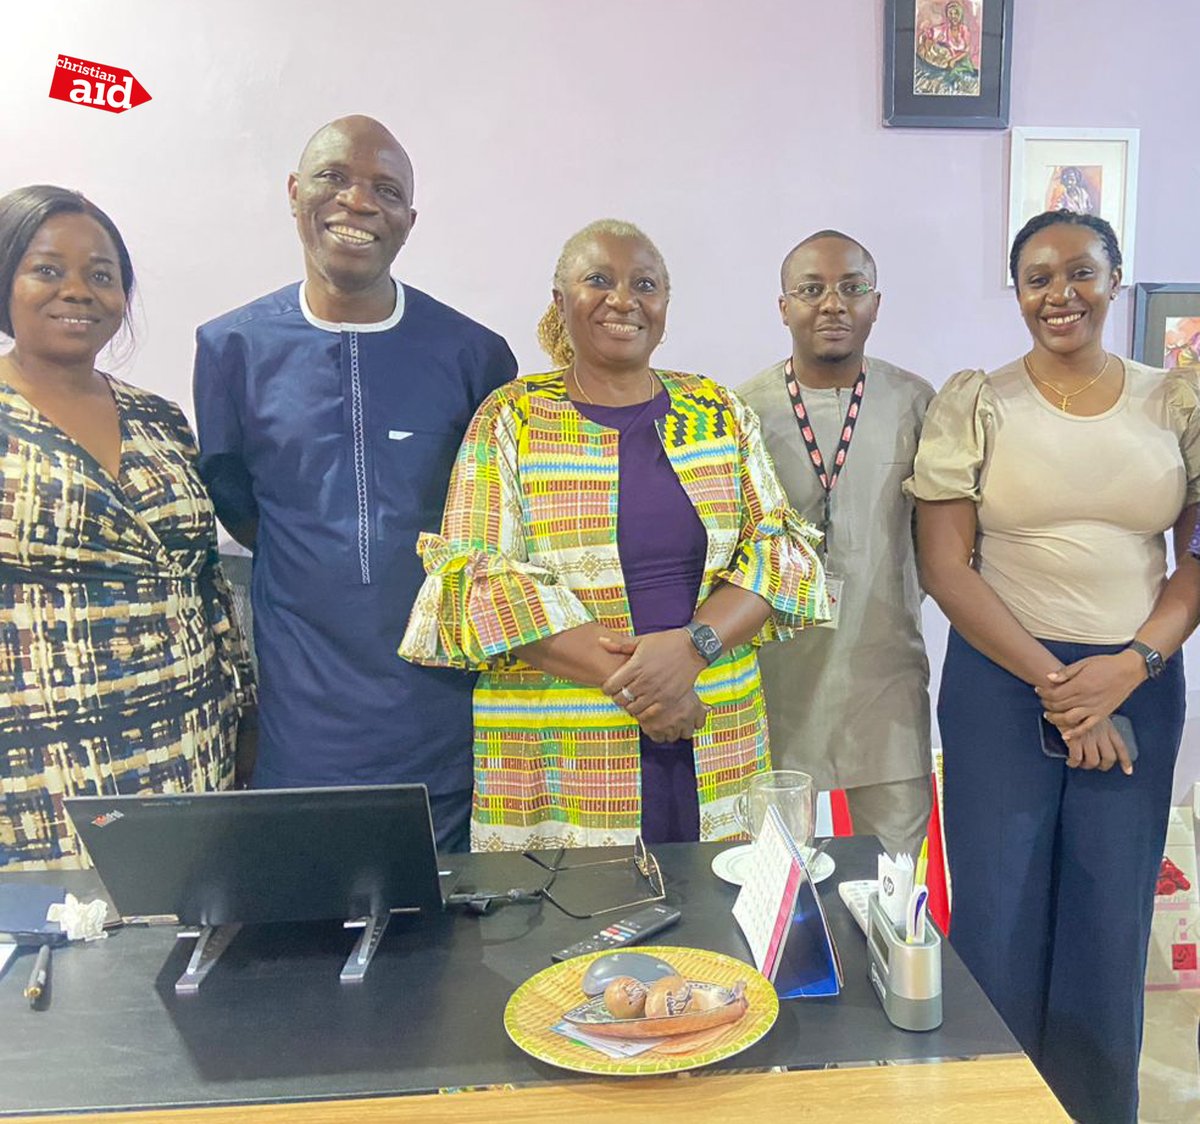 #Partnerships The Head of Programme, Victor Arokoyo and his team, visited @cislacnigeria and @WEP_Nigeria to discuss project progress and future plans, aligning with Christian Aid's focus on localization. #Localization #SustainableChange #StandingTogether #ChristianAidNigeria